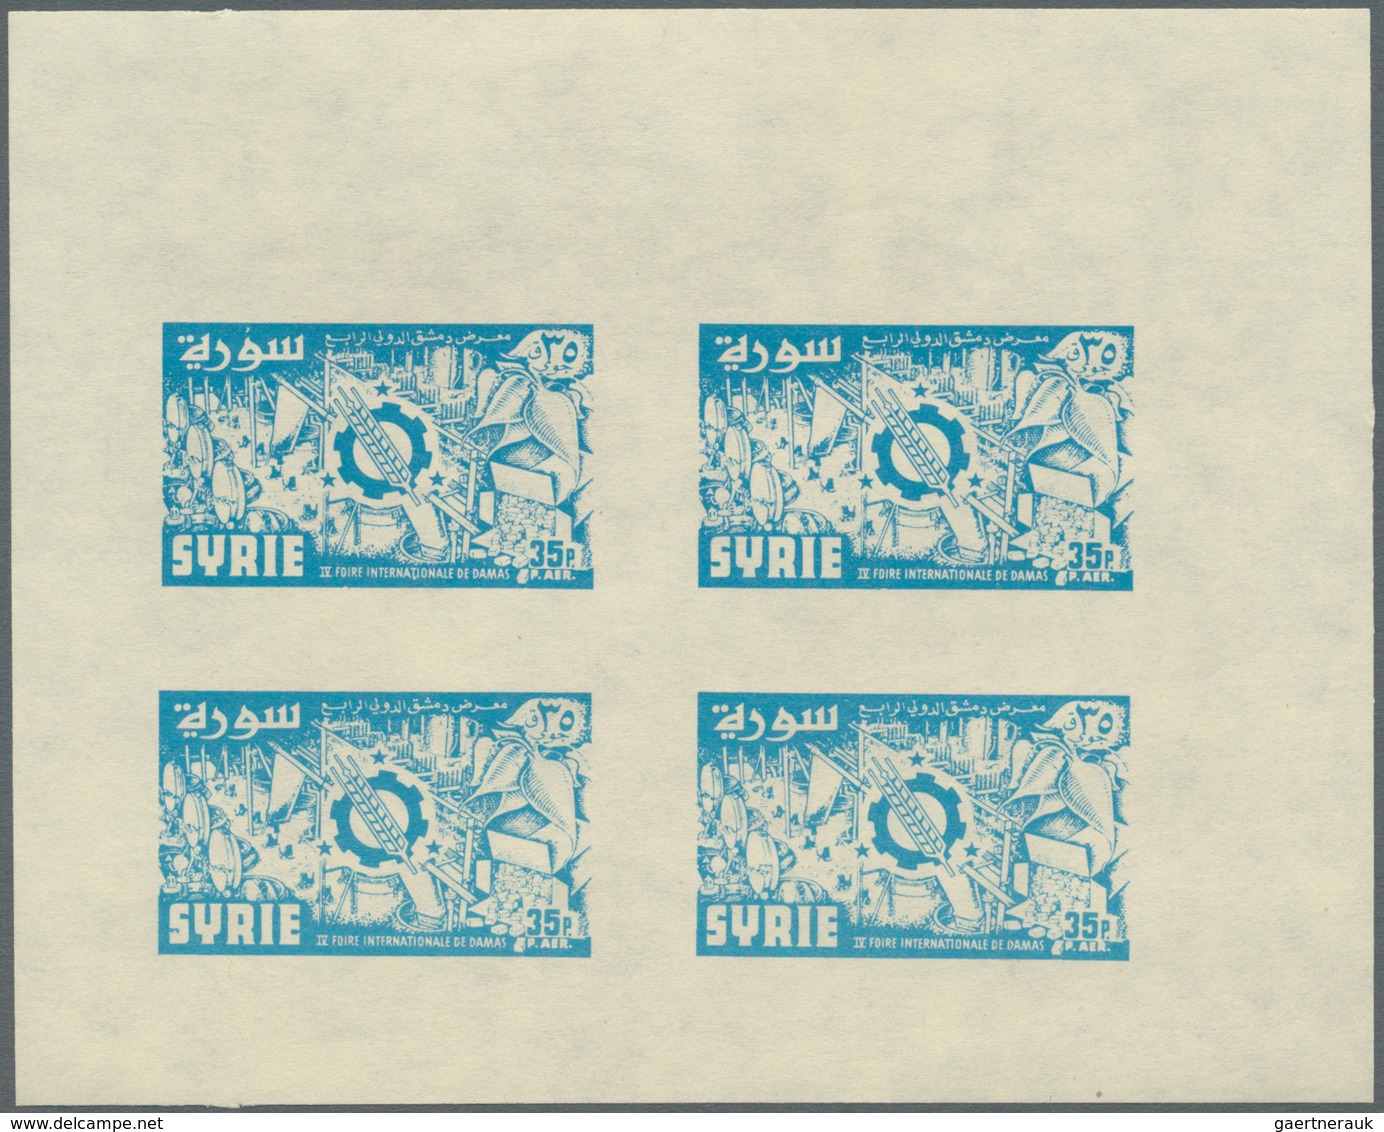 Syrien: 1955/1958 (ca.), Accumulation Of About 170 Imperforate SPECIAL MINIATURE SHEETS In Album Wit - Syrien